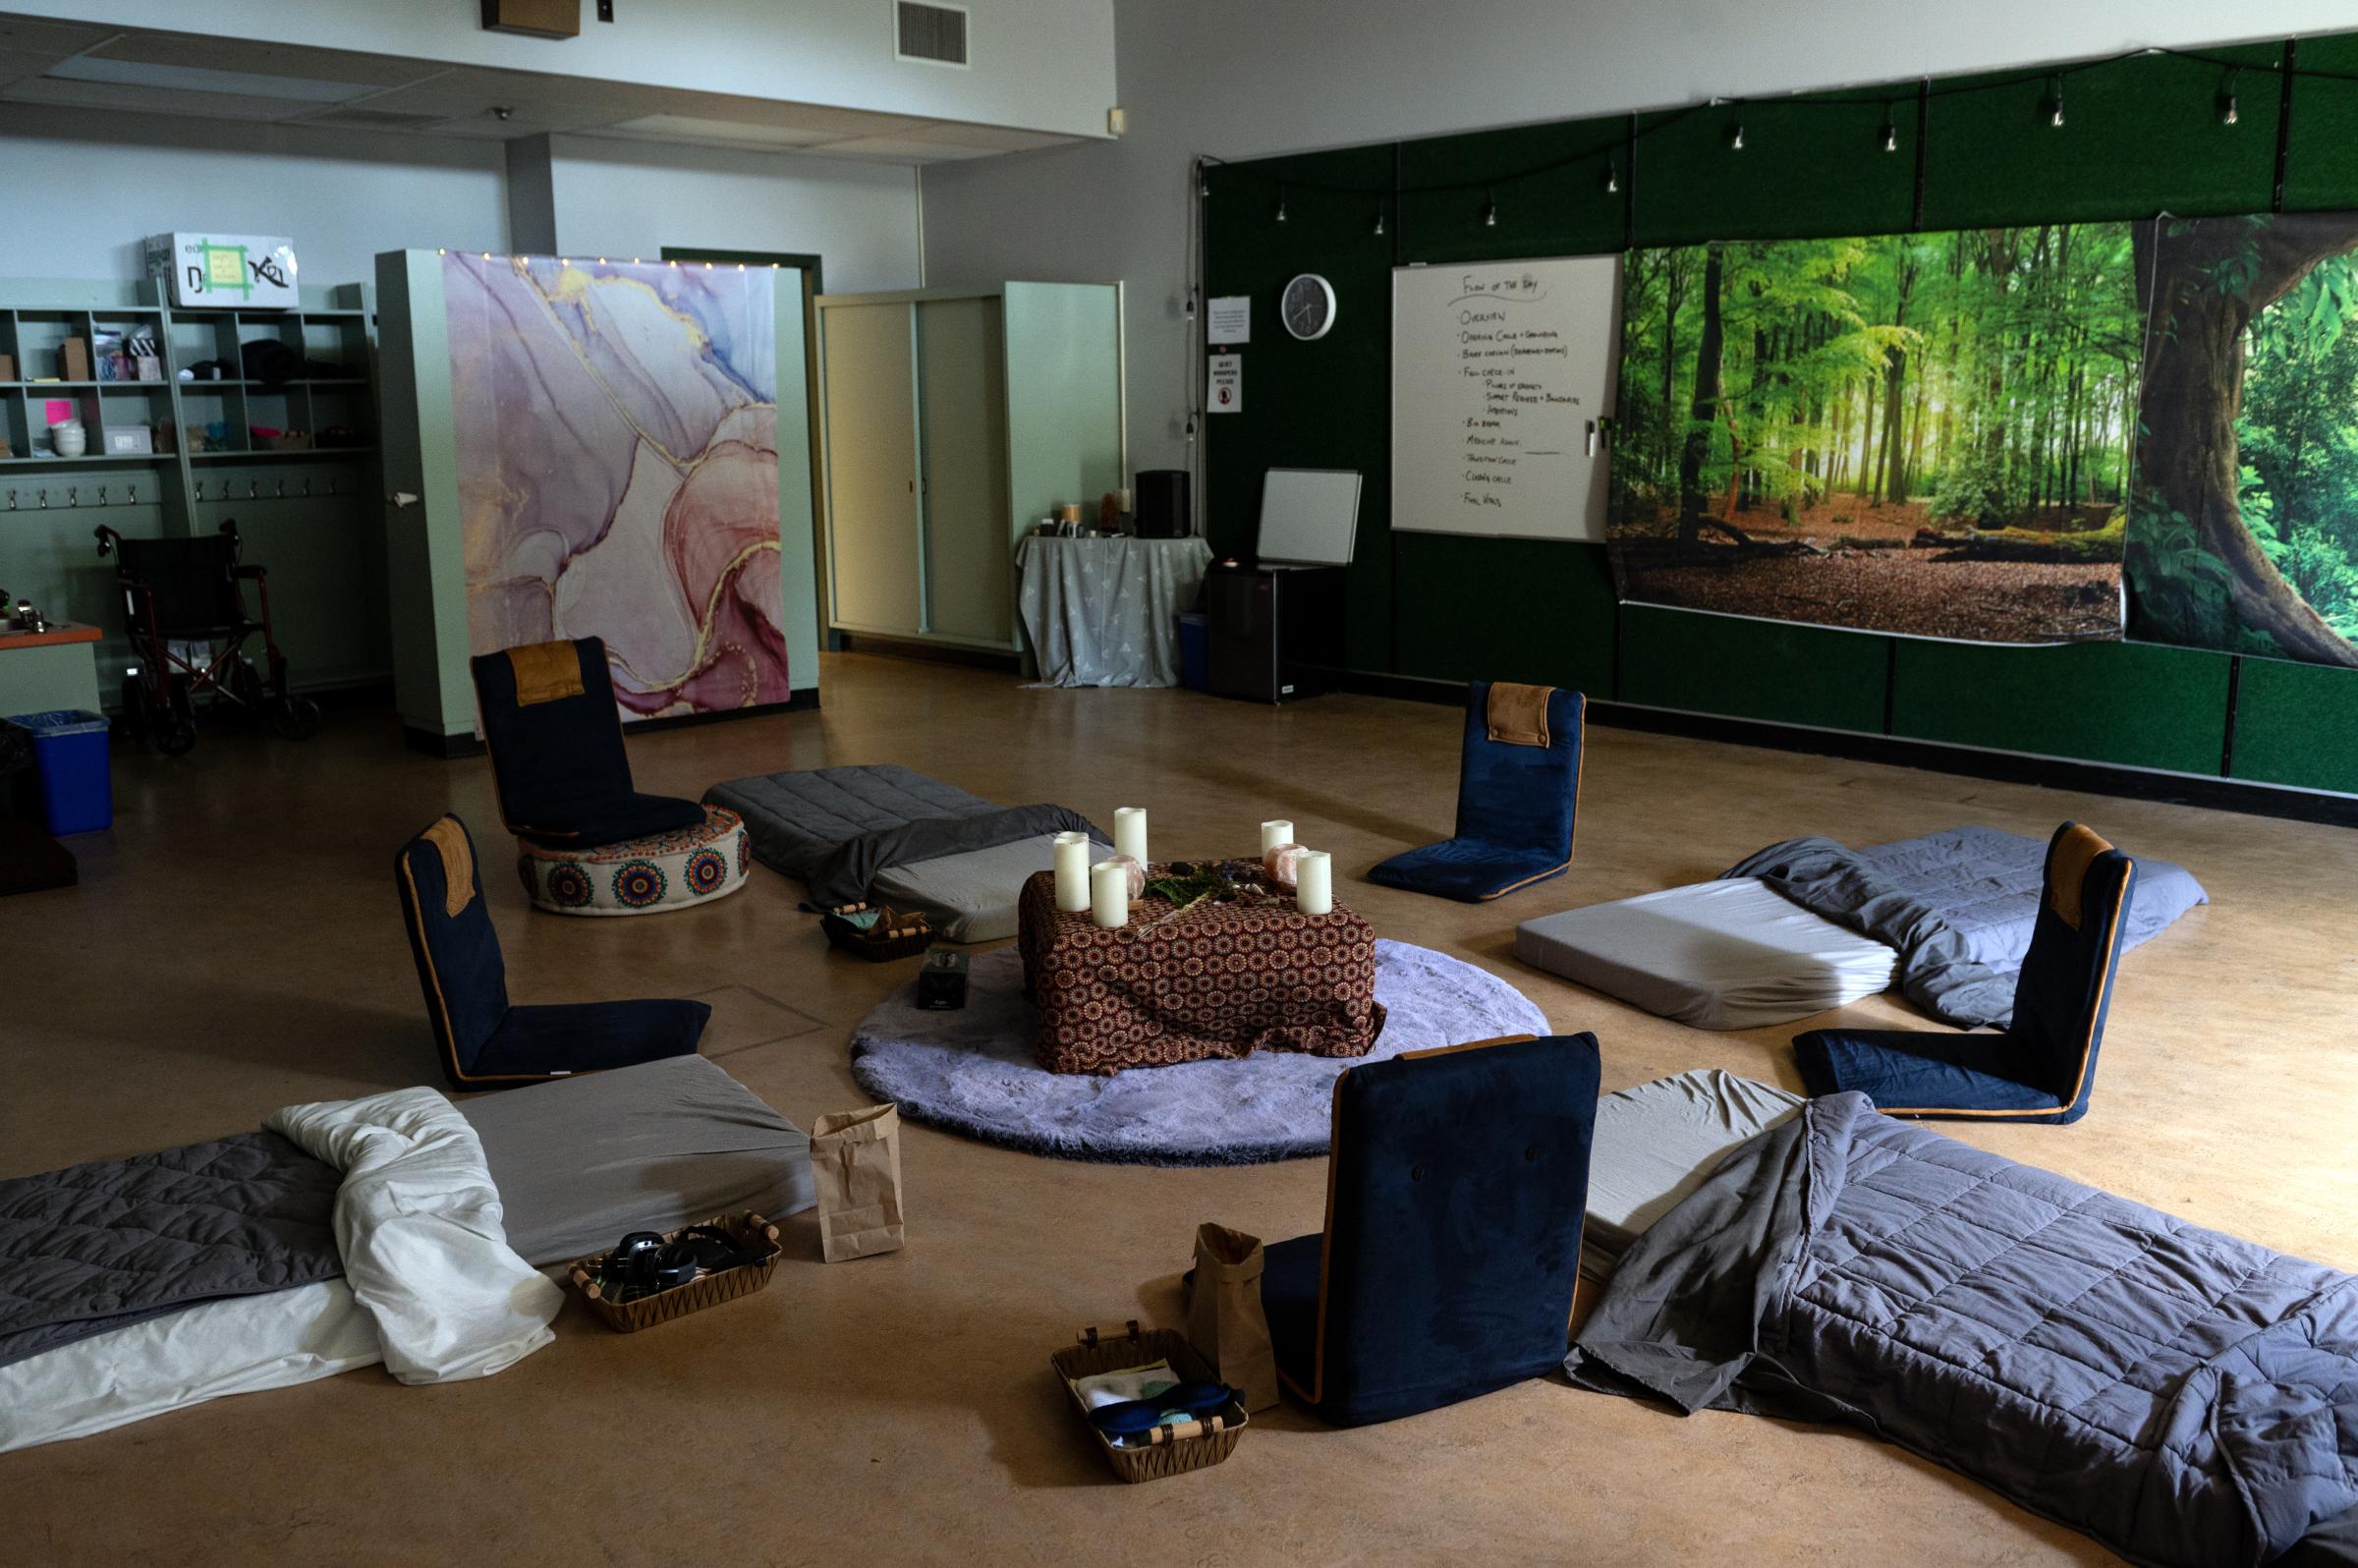 End-of-Life Psilocybin Therapy - A room set up for a psilocybin-assisted therapy session...